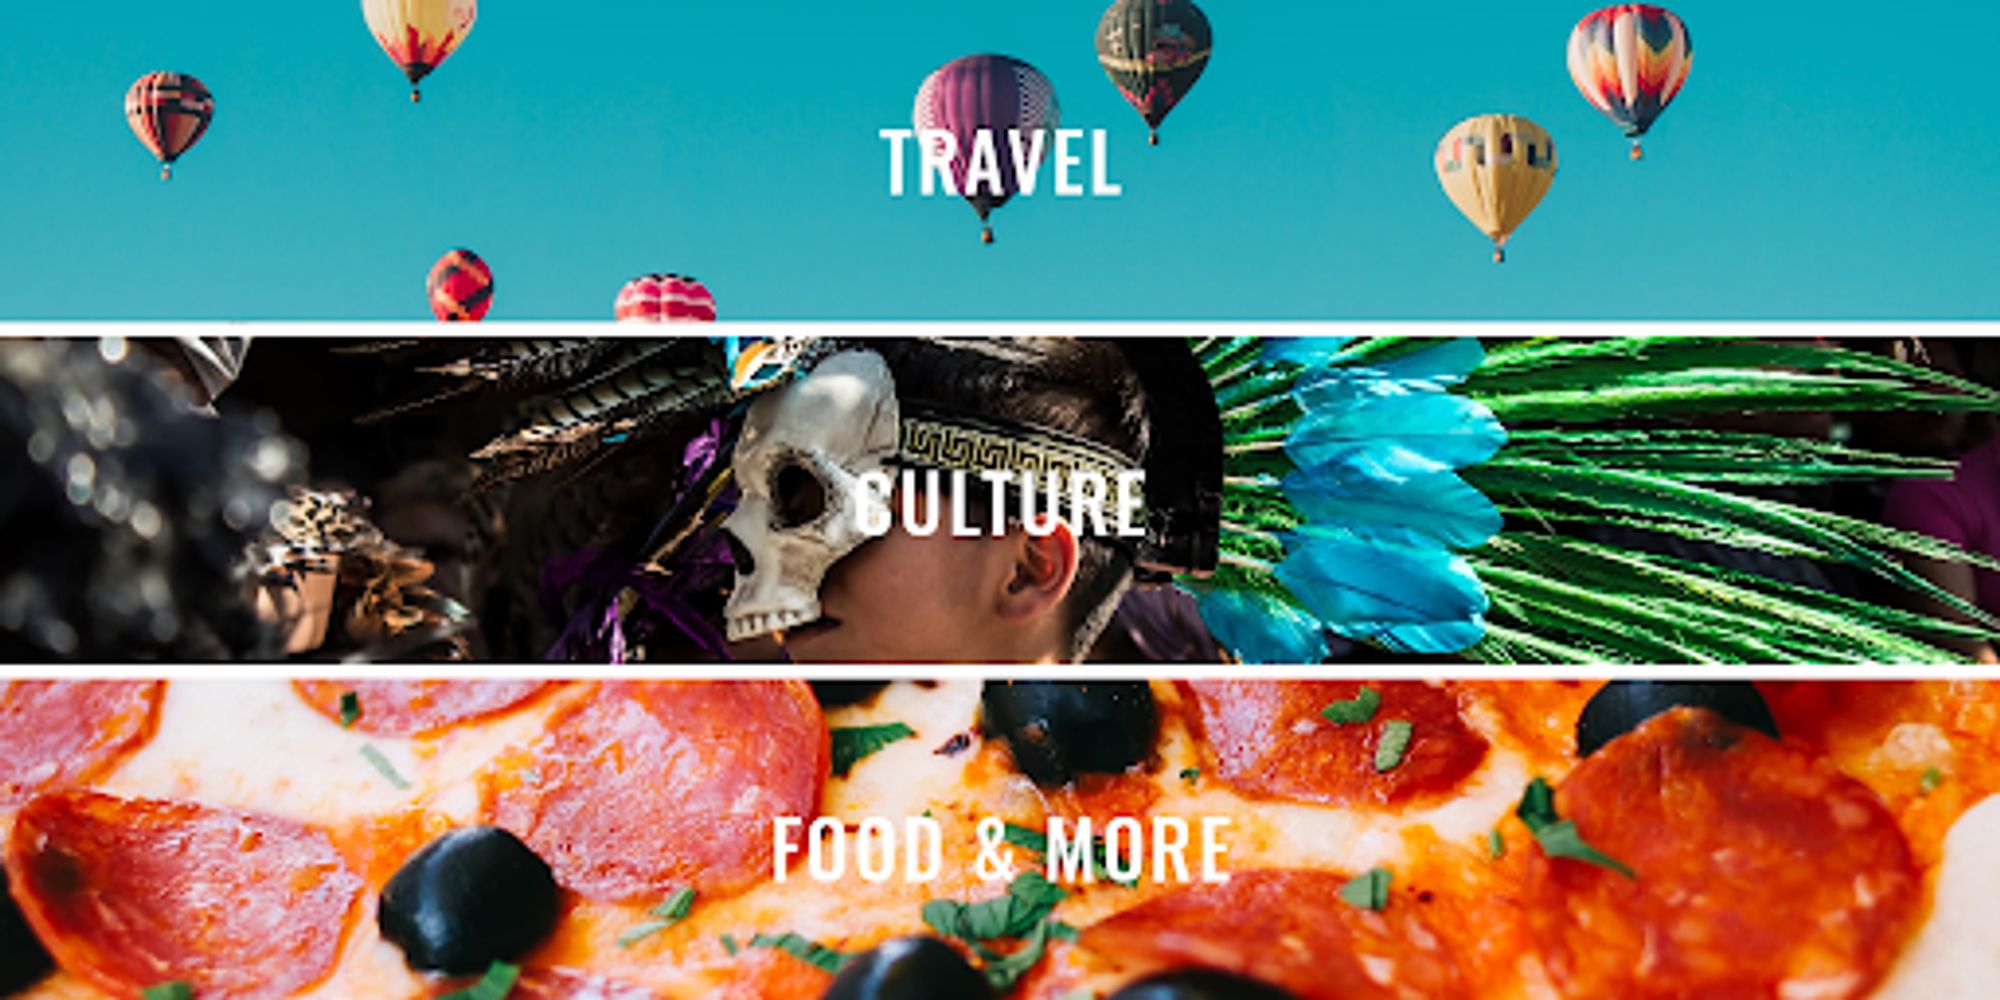 Travel with Drena Travel culture food